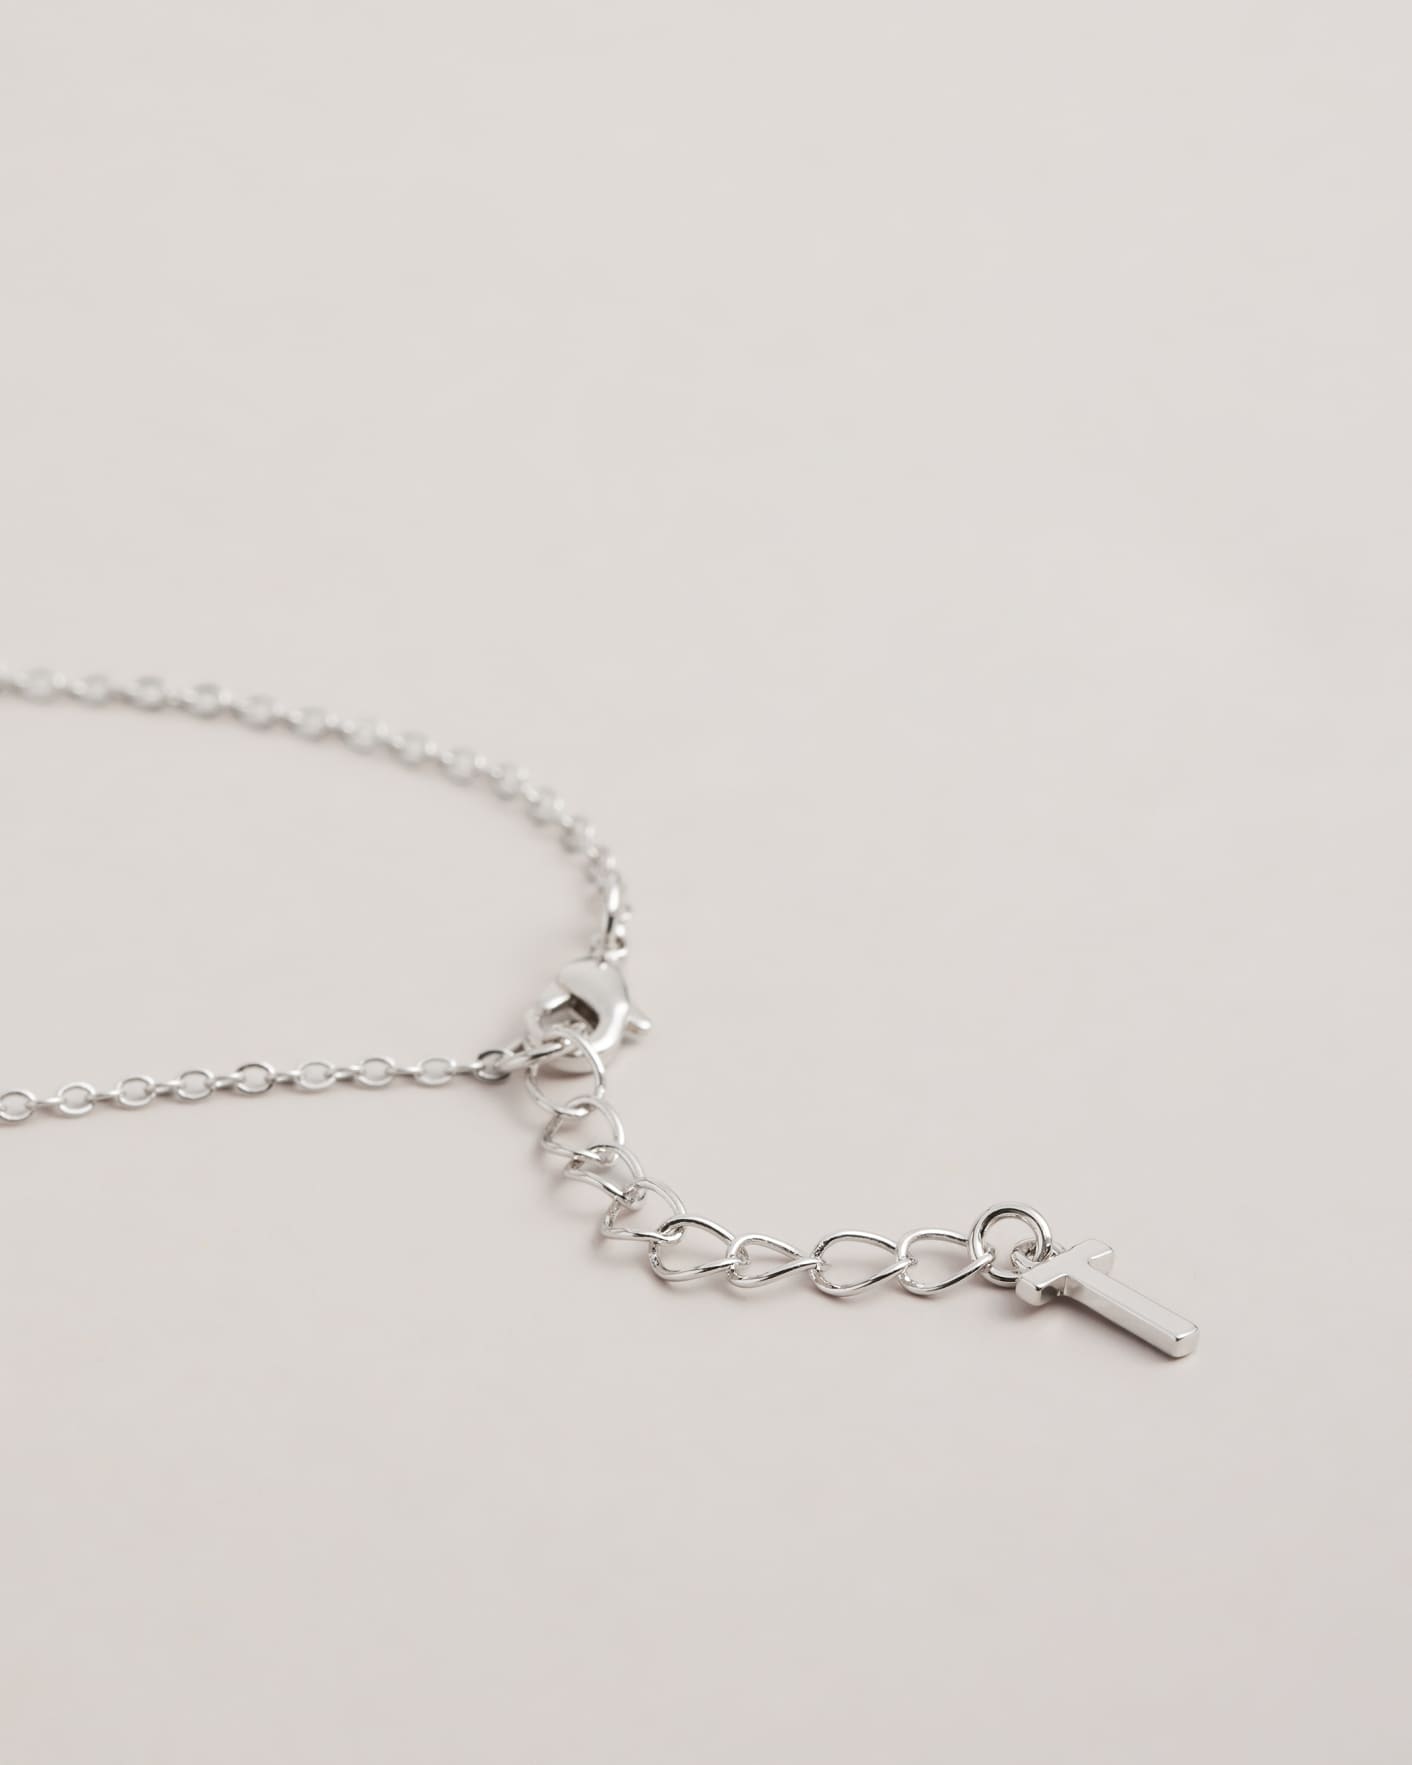 Silver Colour Heart pendant necklace Ted Baker